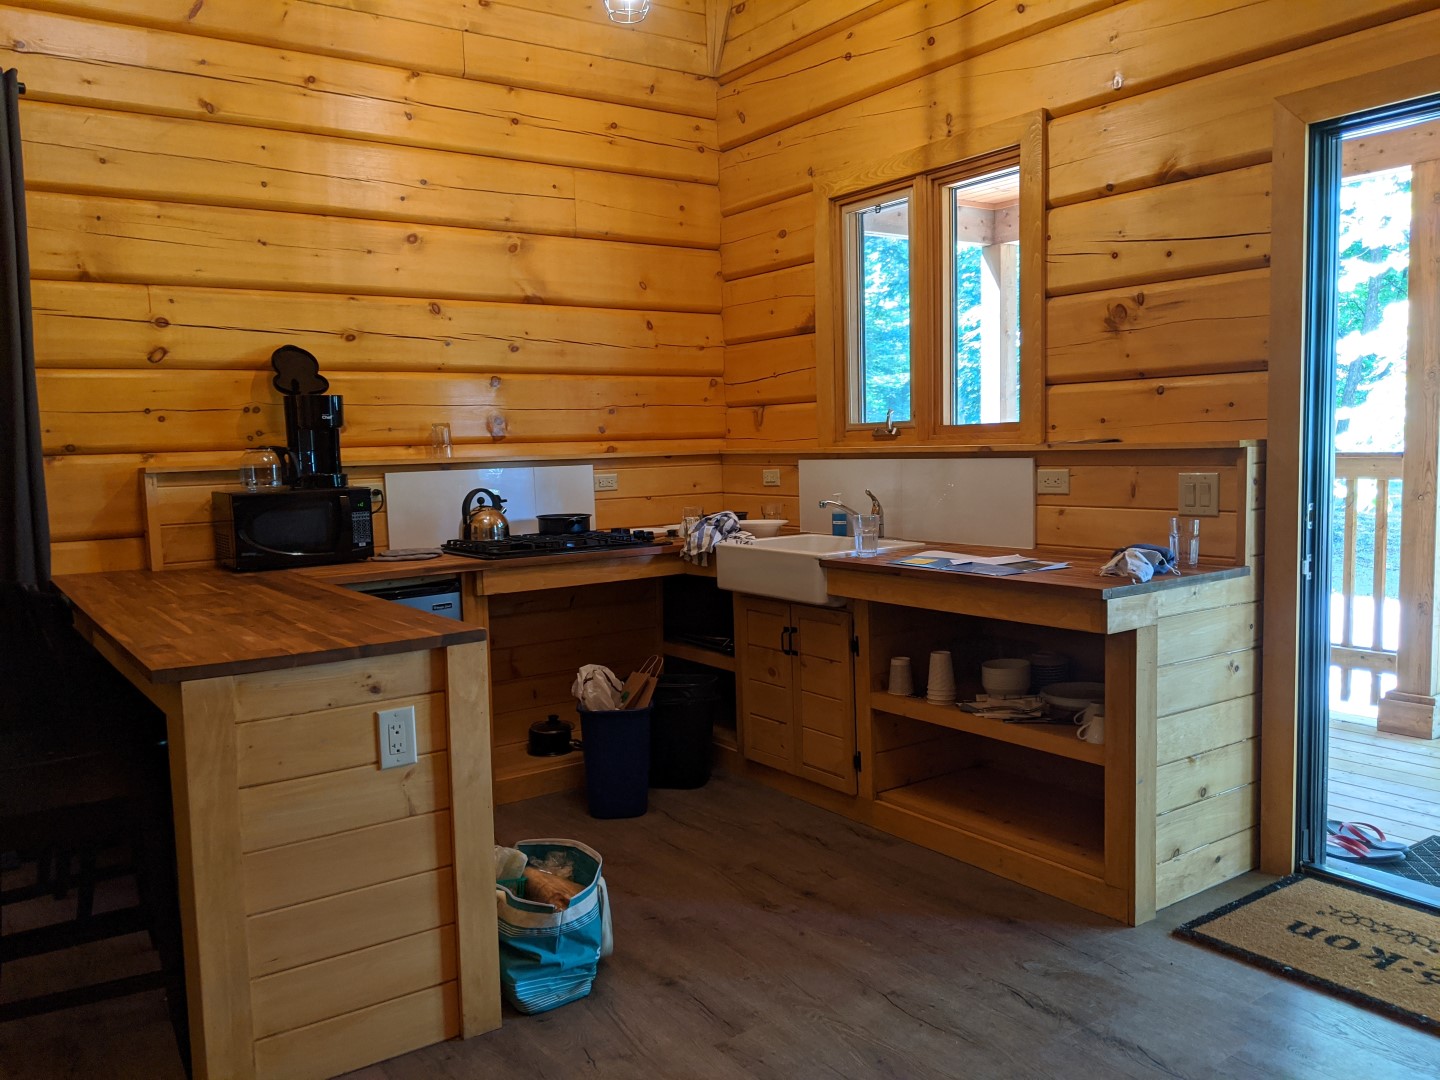 Ontario cabins review